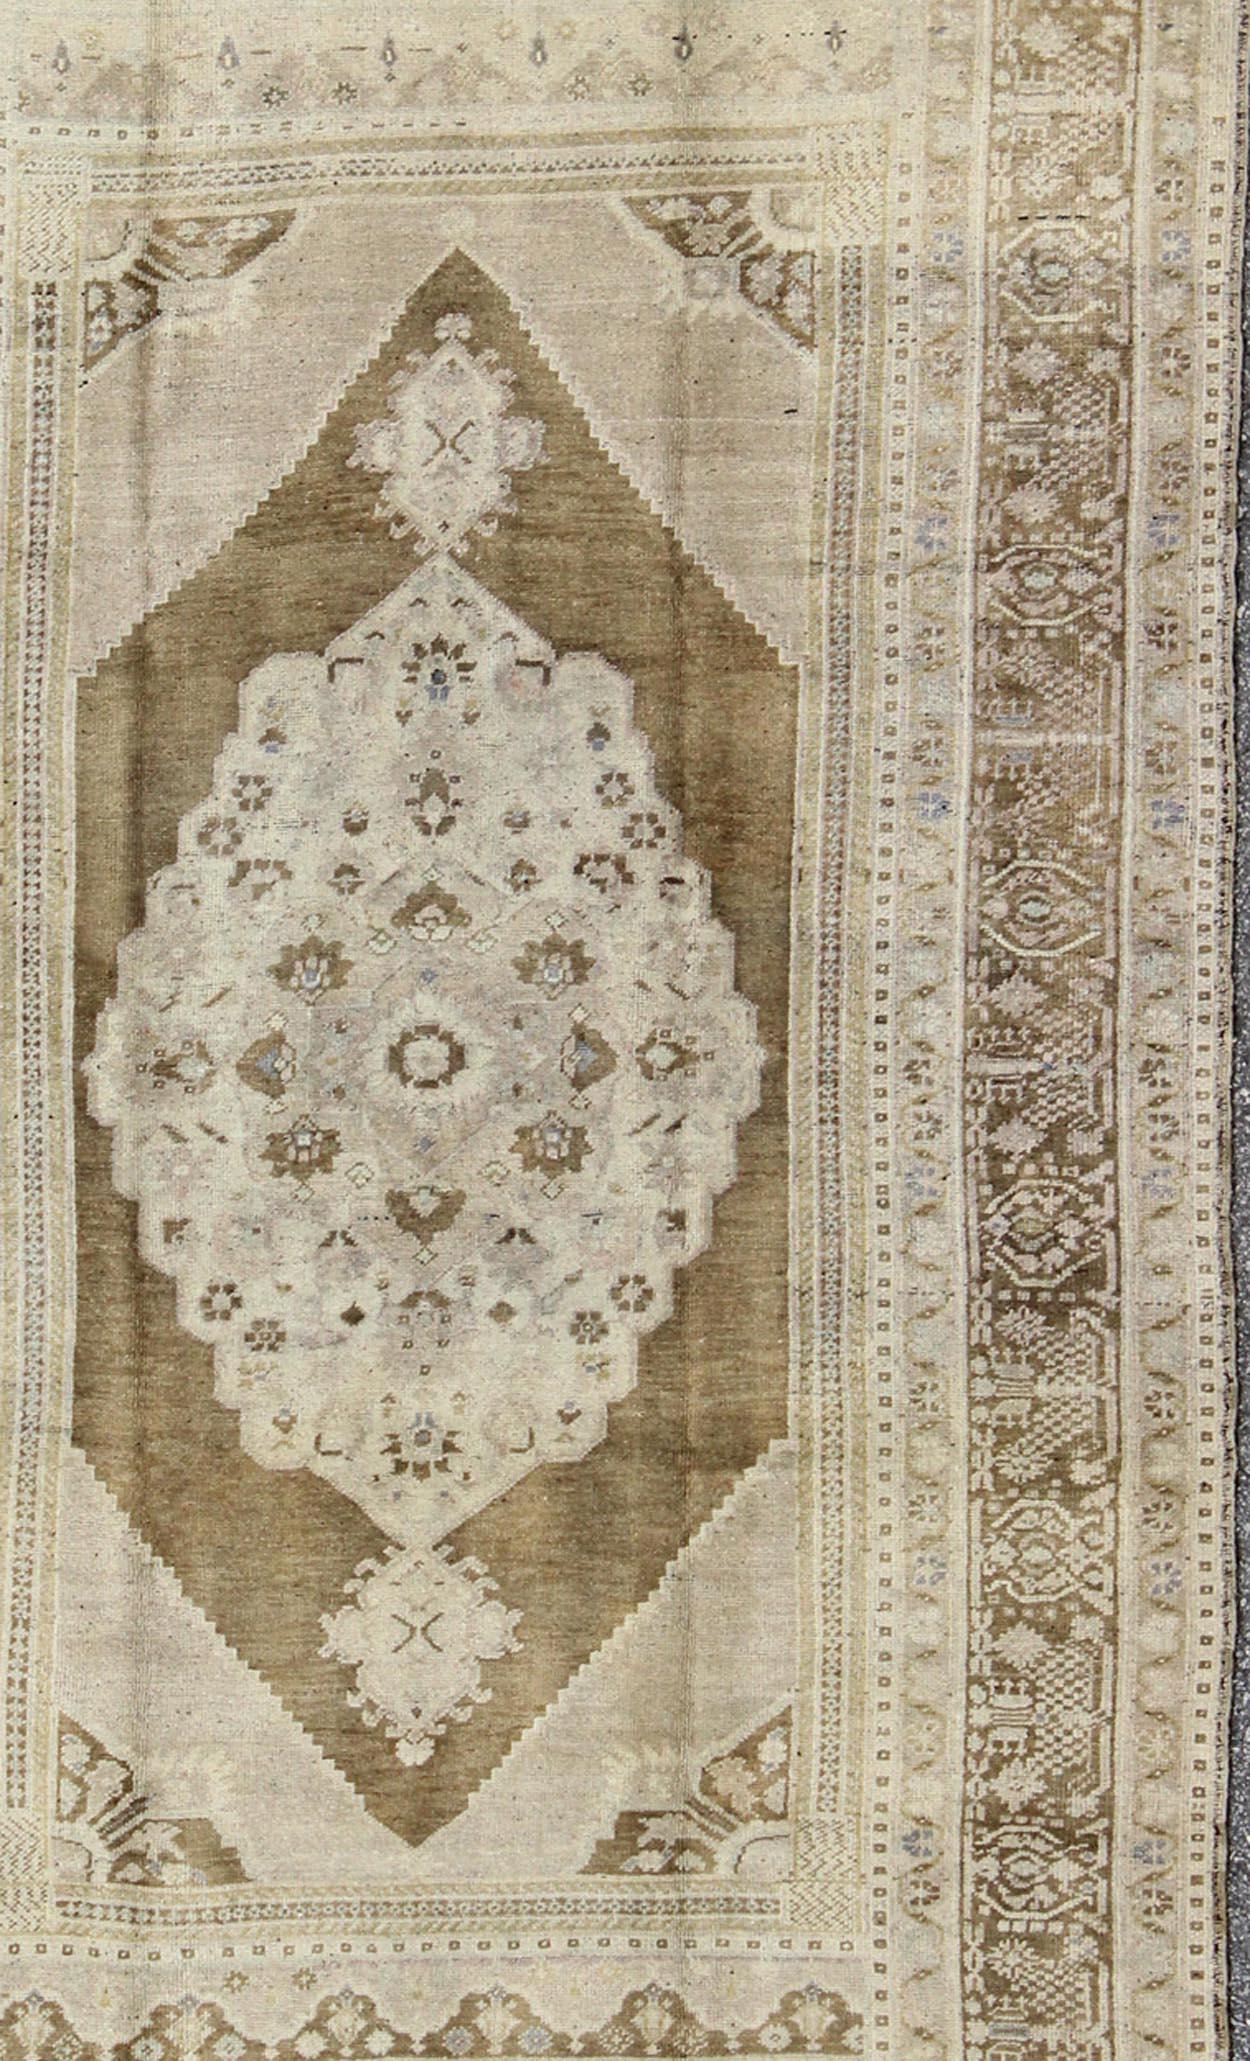 Measures: 5'11 x 9'6

Set on a khaki background and brown border, this vintage Turkish Oushak displays an unique earth tone color combination with various shades of taupe and army green along with hints of light blue and neutral colors. The border